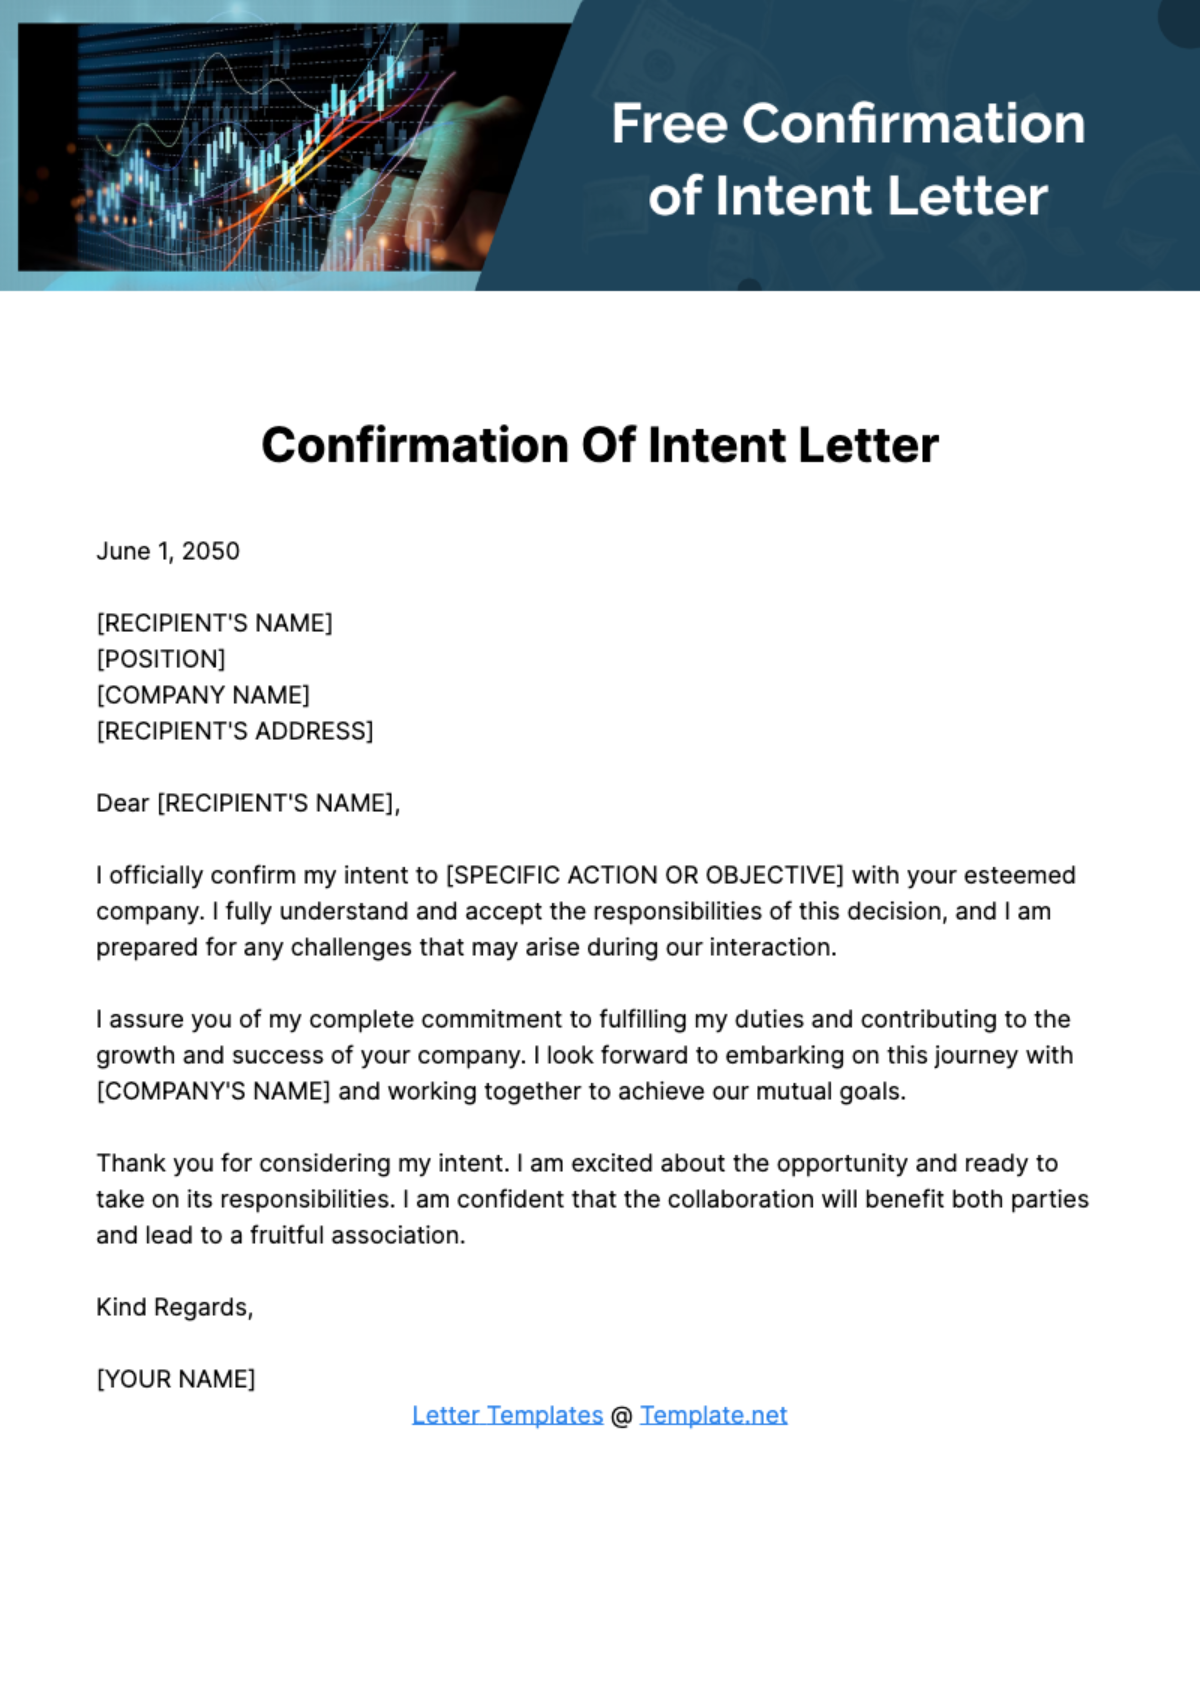 Free Confirmation of Intent Letter Template